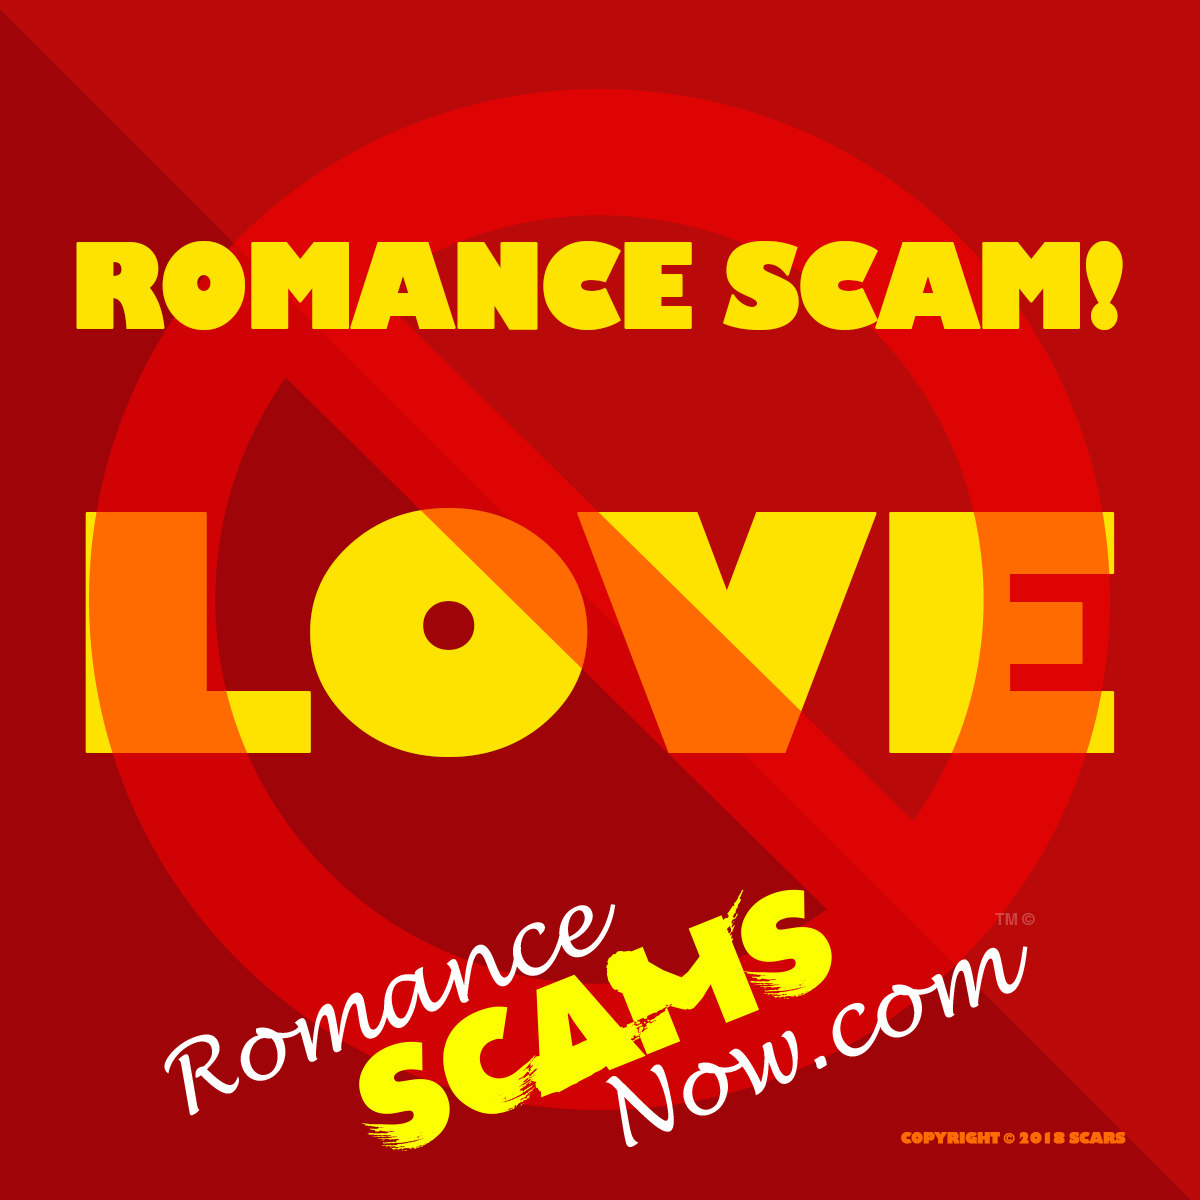 SCARS ™ / RSN™ Anti-Scam Poster 151